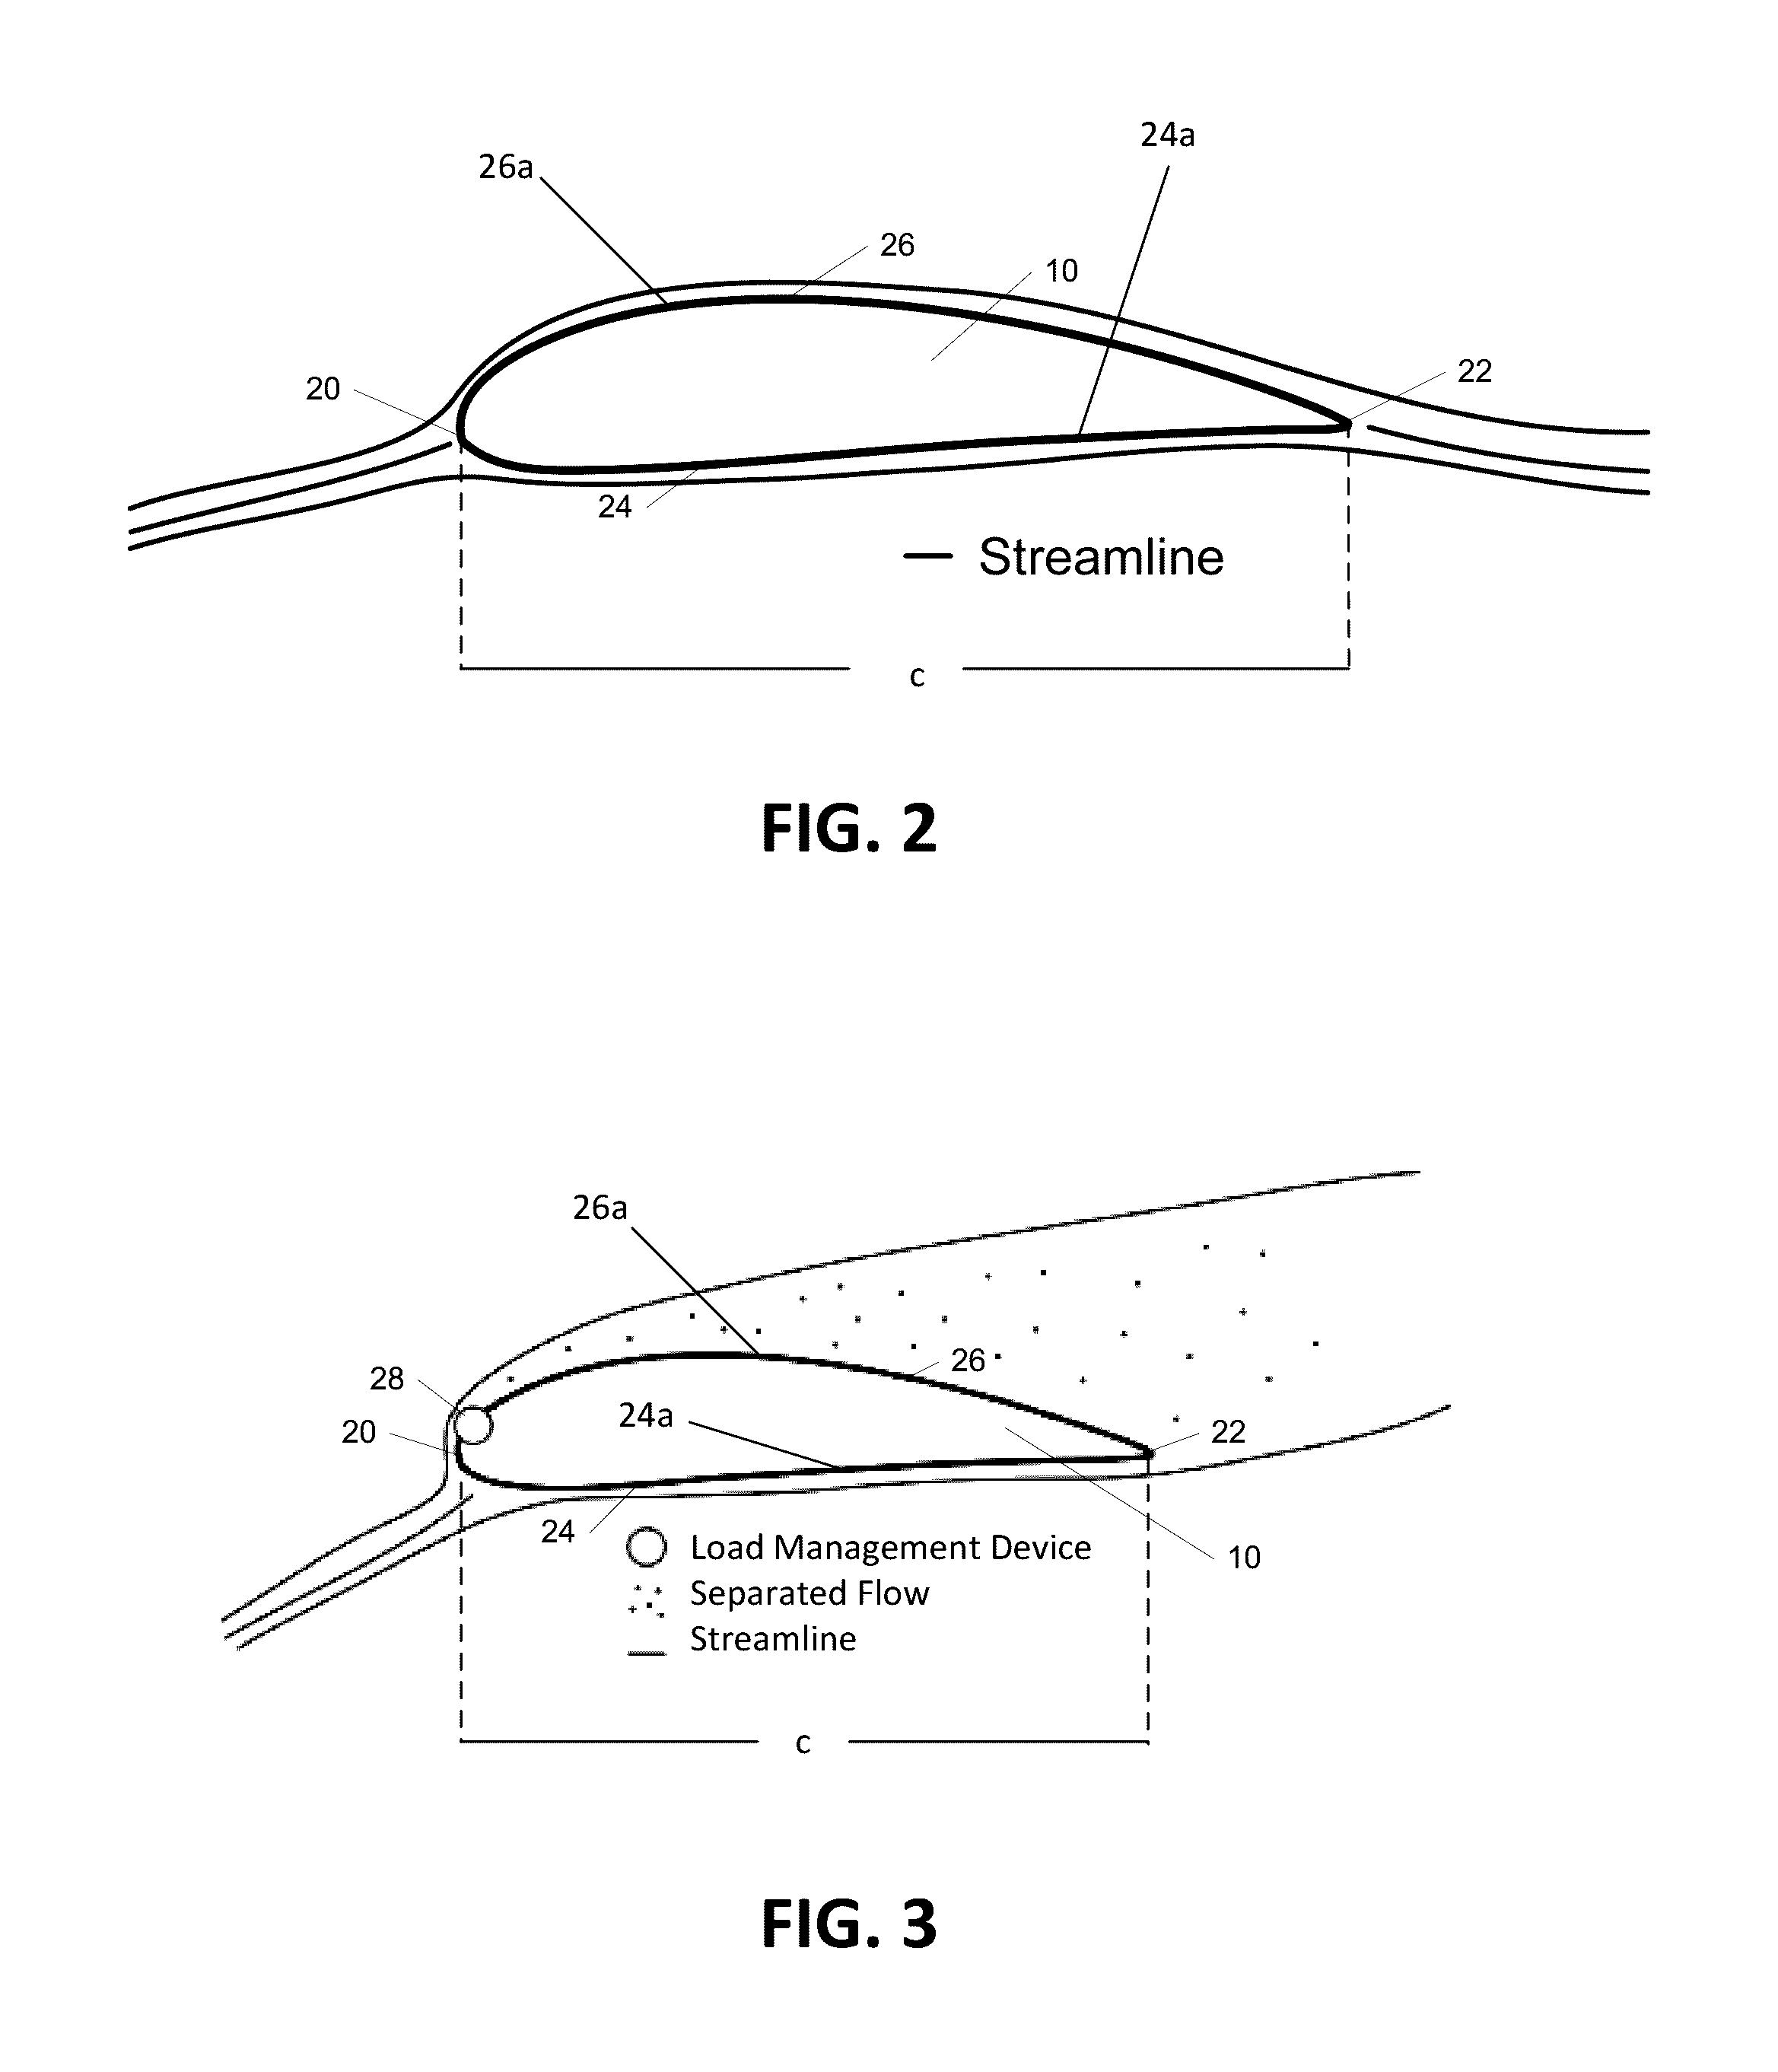 Actuation of distributed load management devices on aerodynamic blades